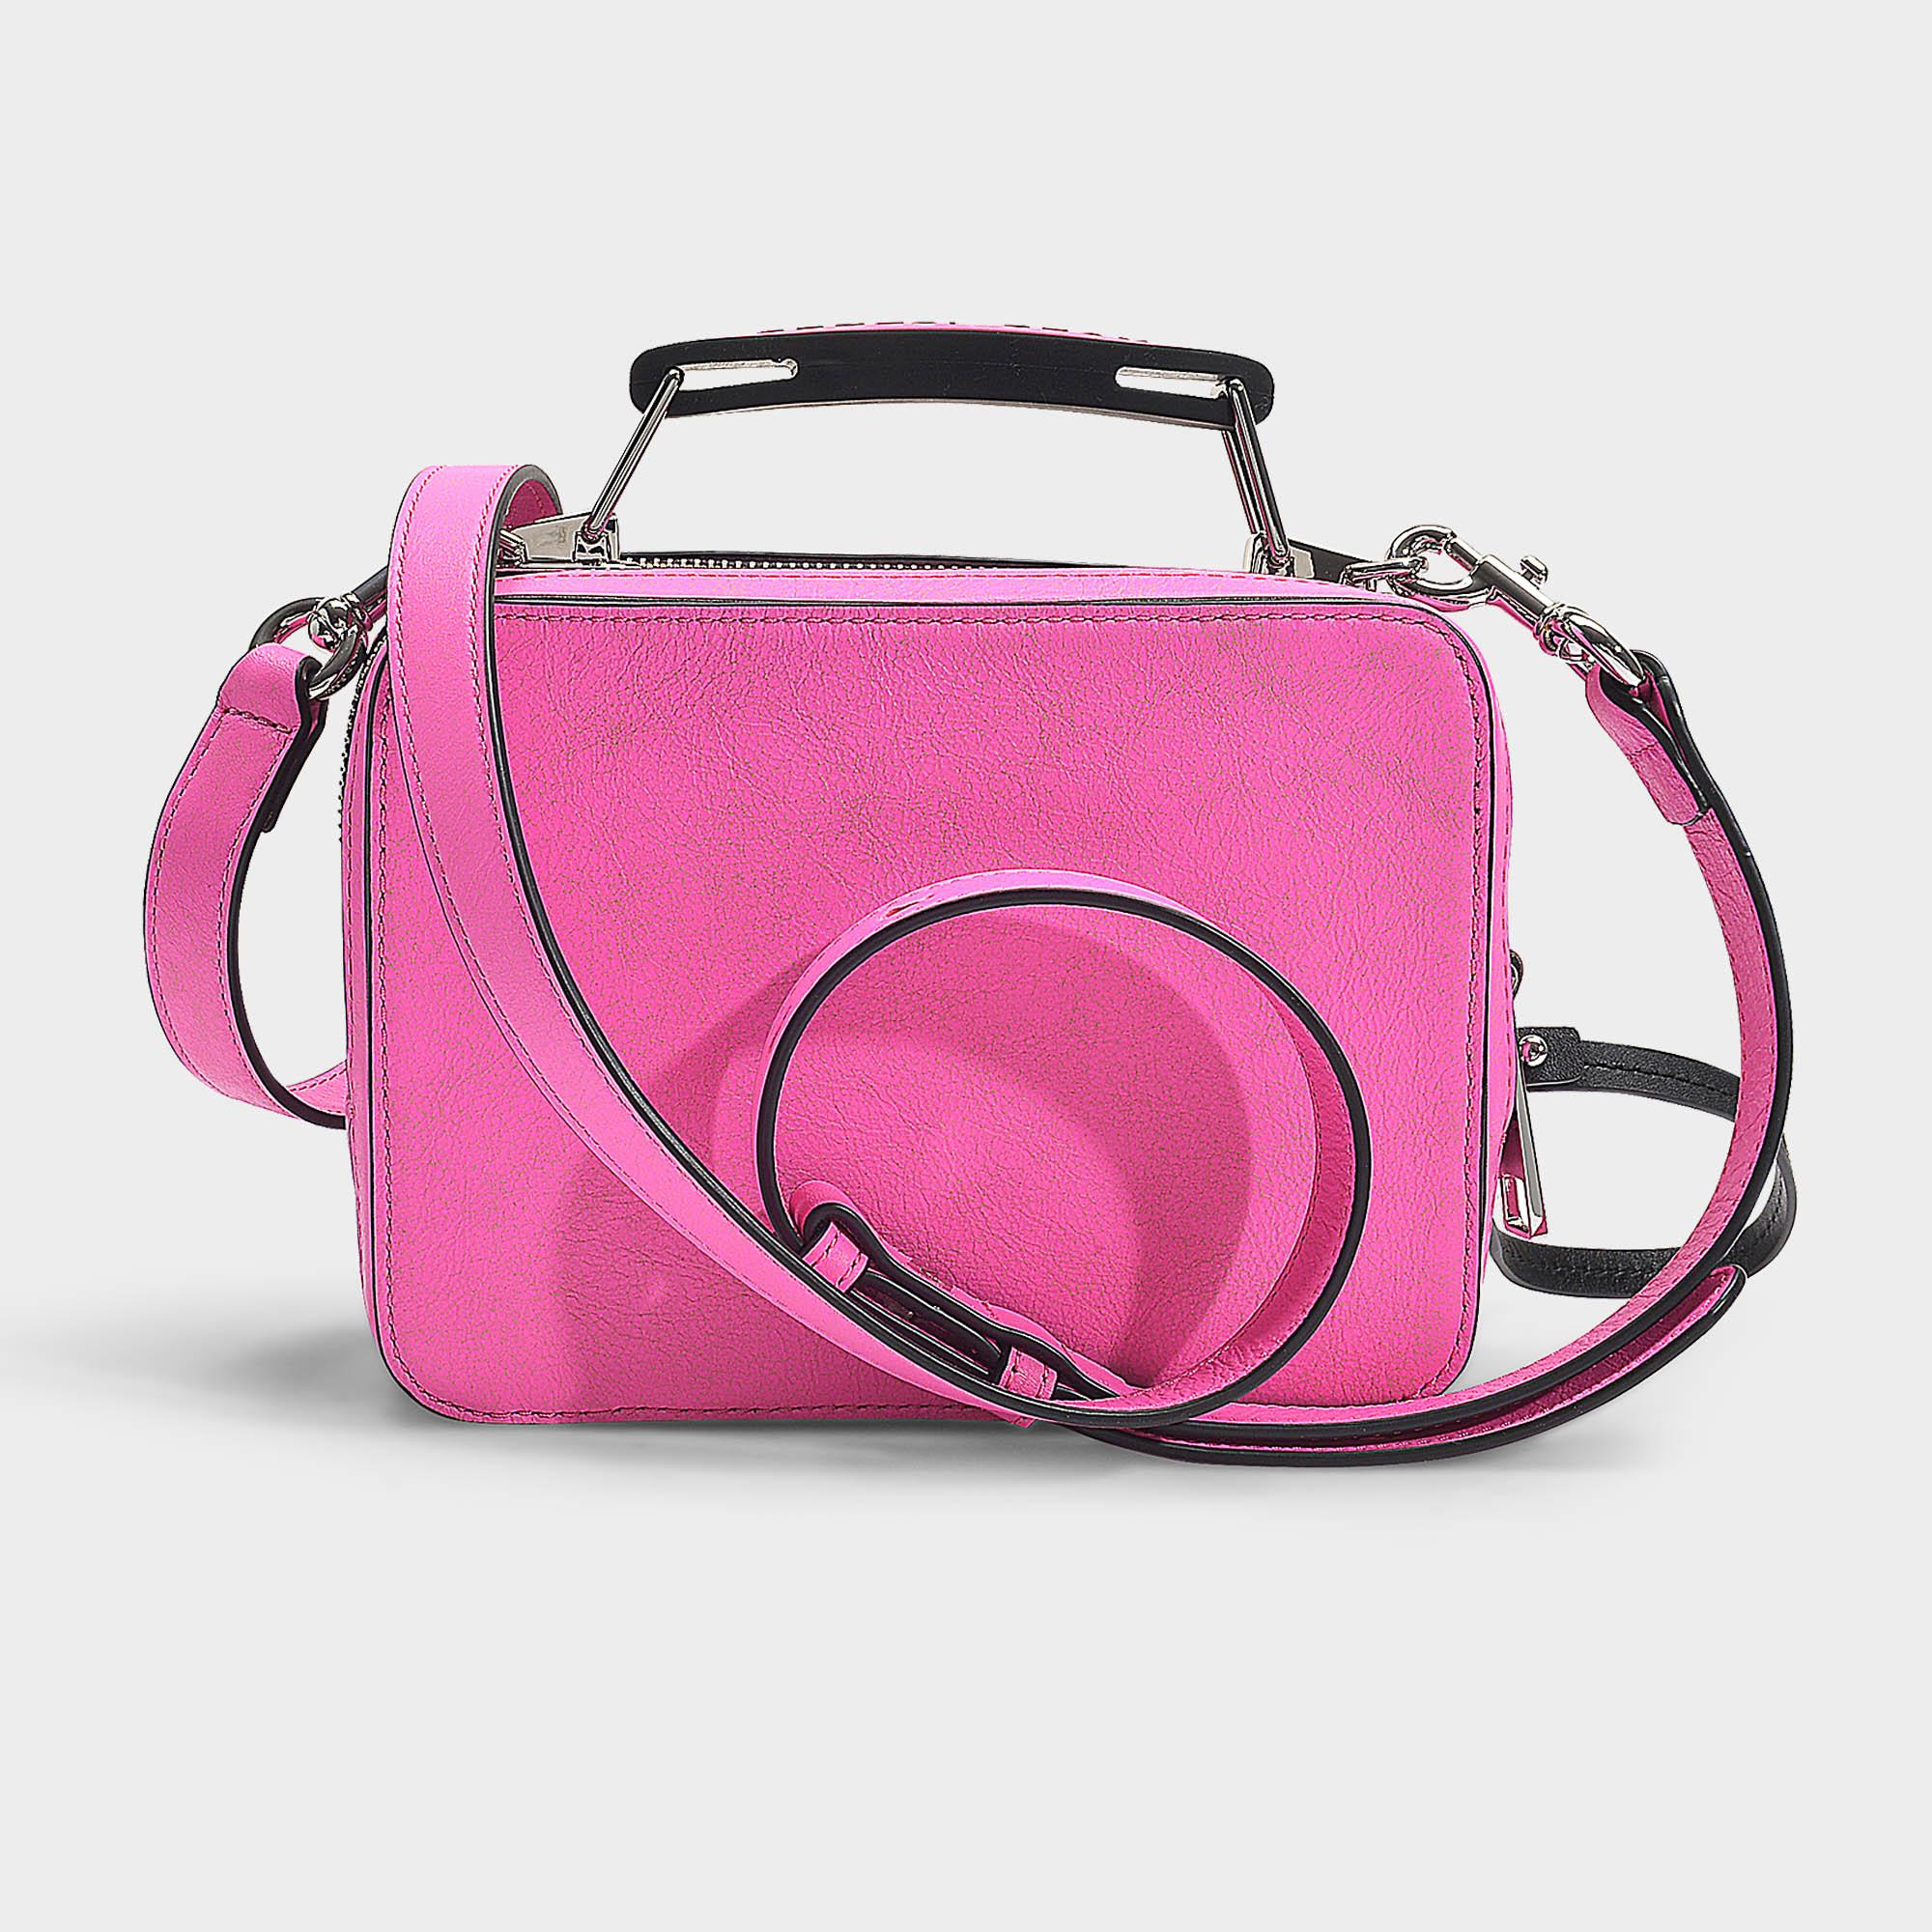 Marc Jacobs The Box Bag In Bright Pink Leather - Lyst